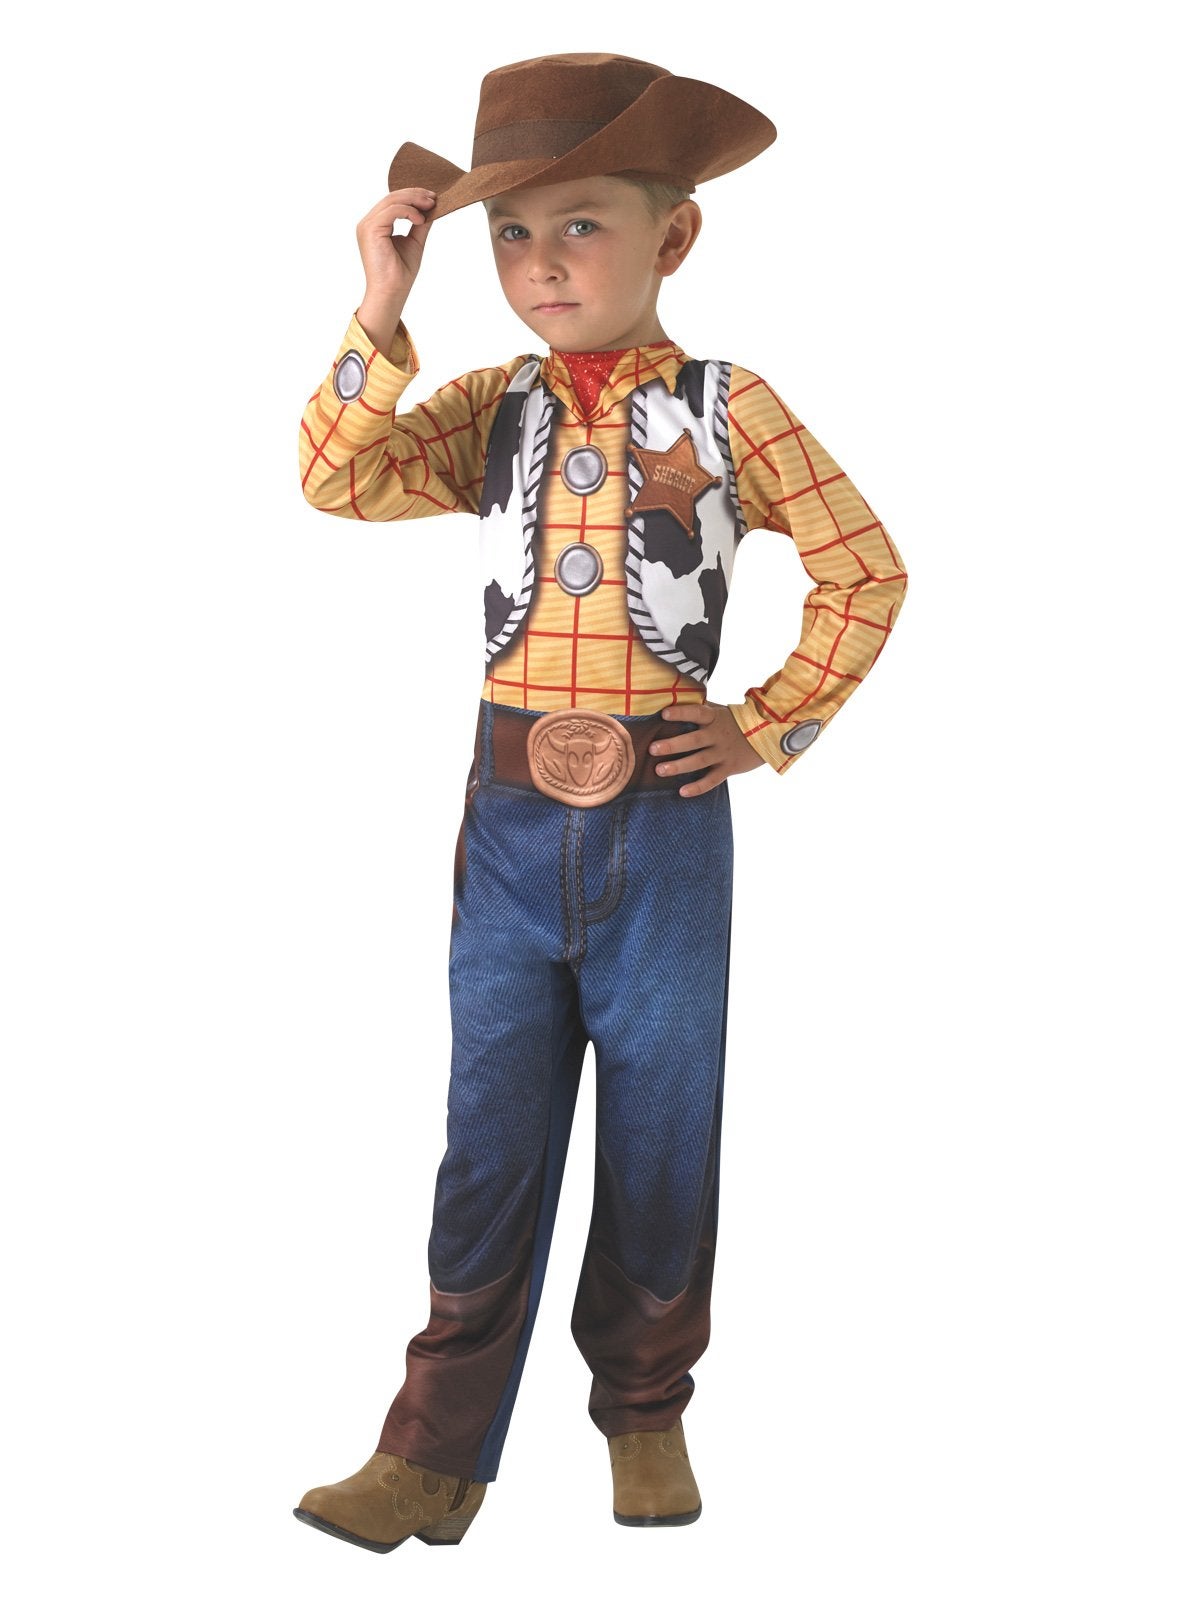 Woody Costume for Kids - Disney Toy Story